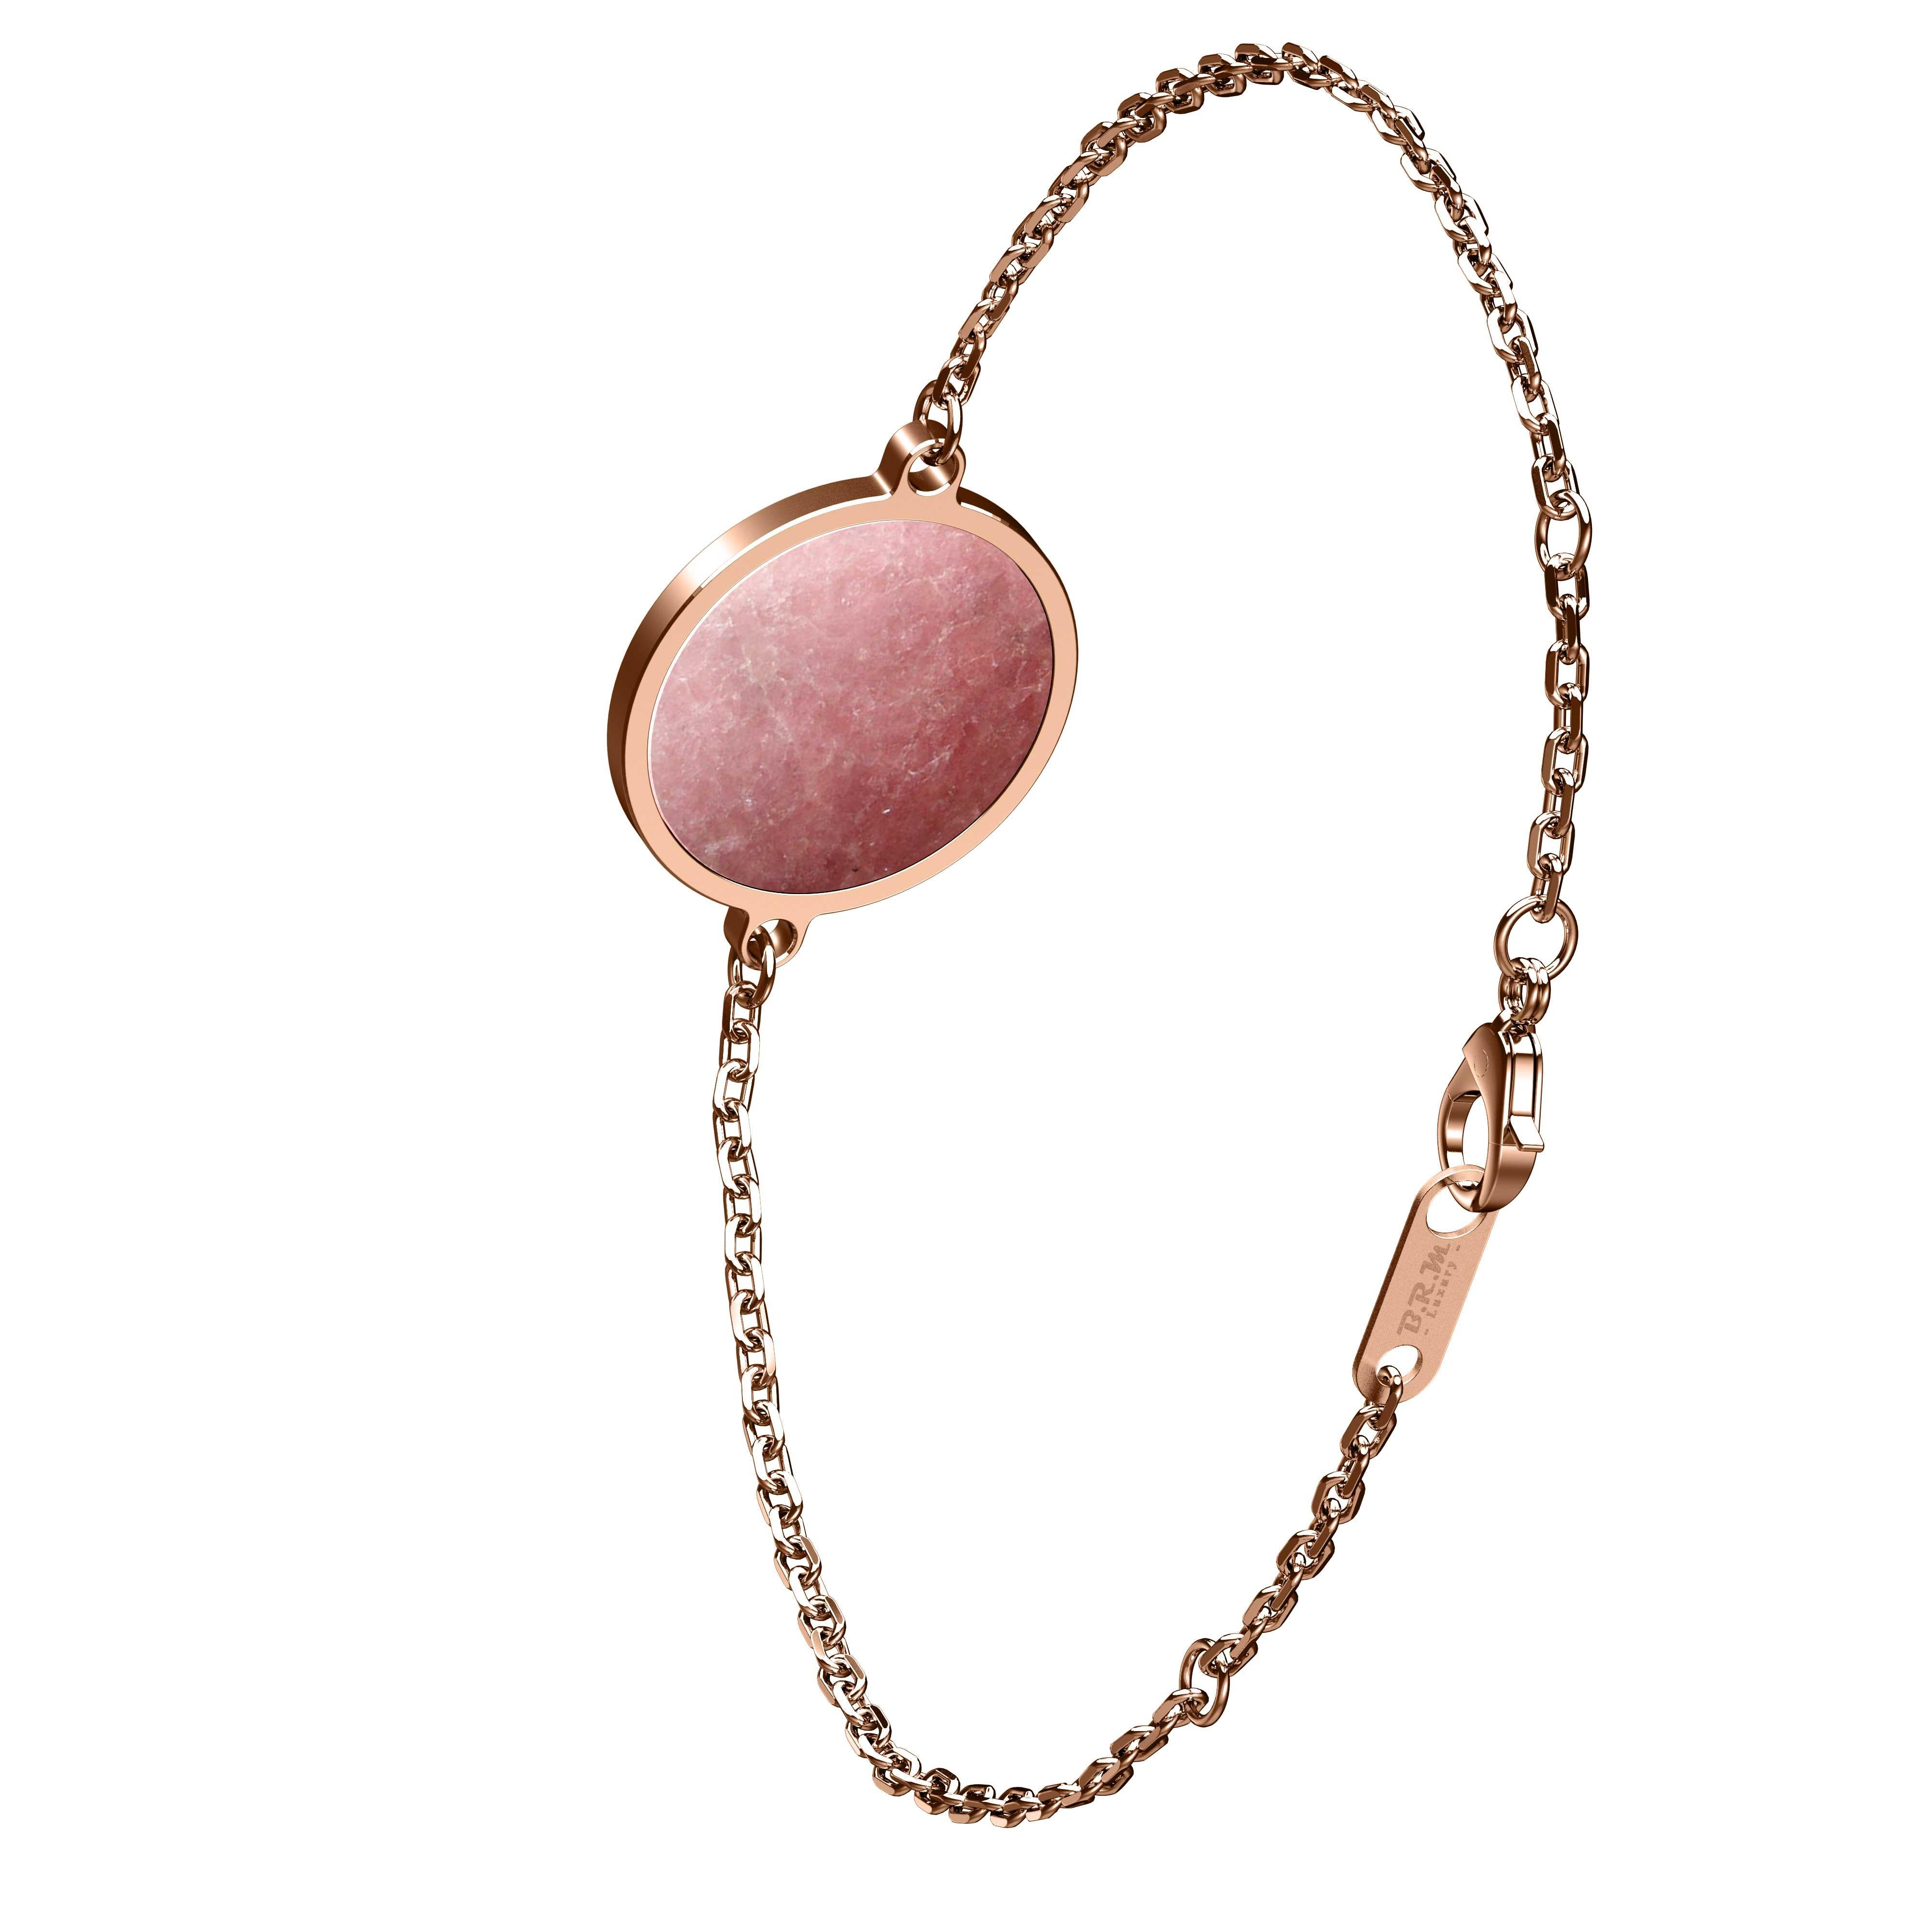 B.R.M Luxury Anneau bracelet 18 Carats rose gold, Diamonds and rhodonite stone
B.R.M Luxury’s third range of bracelets is called ANNEAU. A simple name for a potent symbol. Indeed, it has no beginning or end — no break in its continuity. Round as it